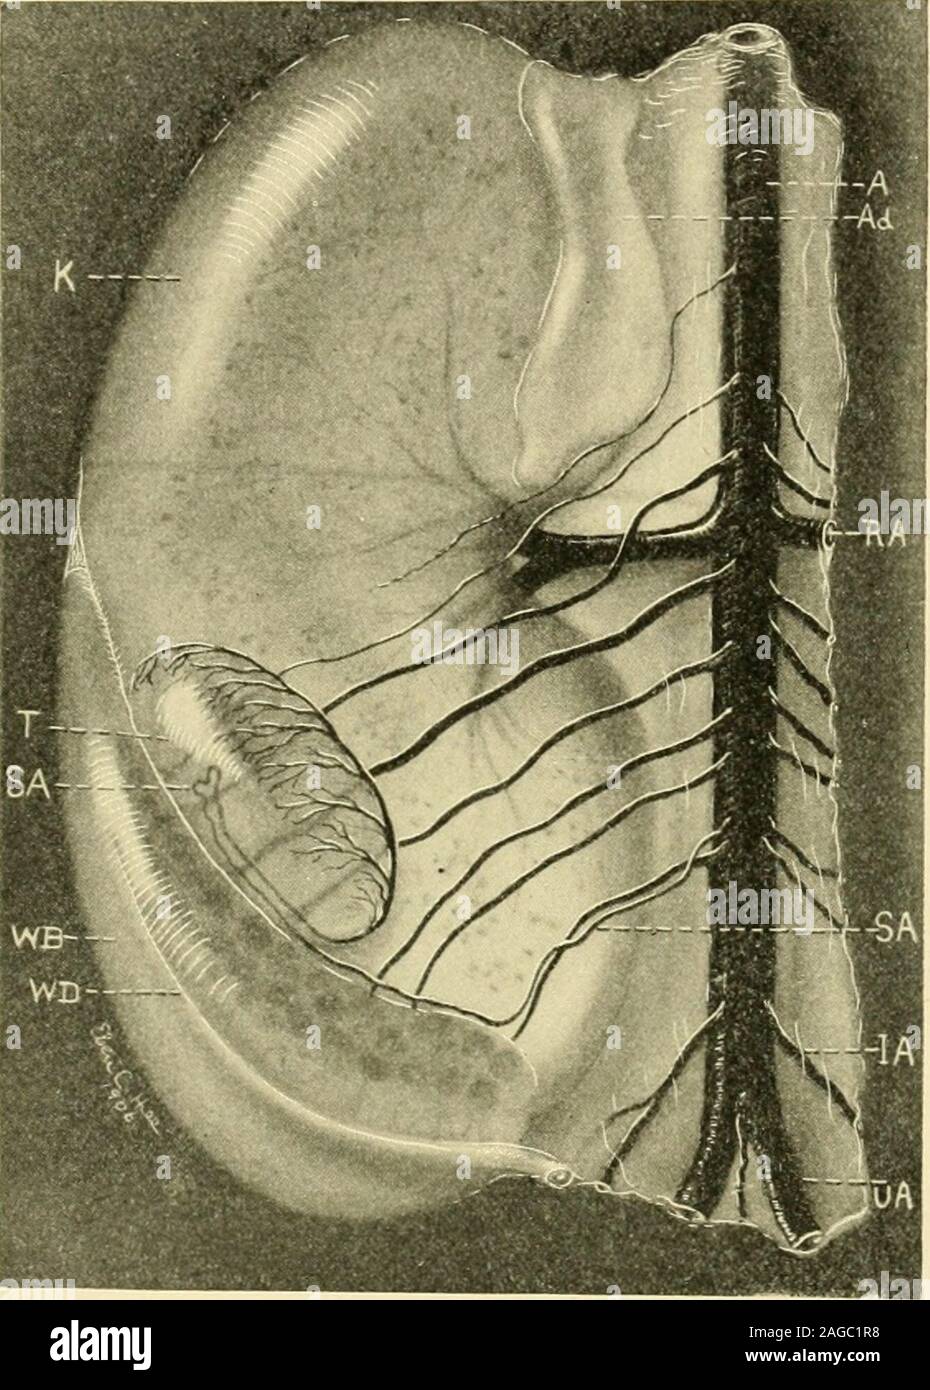 . The American journal of anatomy. most decided lengthening accom-panied by more marked convolutions. A similar condition is not foundin the human embryo, nor to such marked extent in the mouse of thisstage. Microscopic sections demonstrate the capsular artery branching witha certain definite regularity on the surface of the gland, and sendingminute arteries into the substance of the testis. A thick section showsthese vessels entering perpendicularly and giving off branches whichform capillary anastomoses around the medullary cords. Clark, J. G.: The Origin, Development, and Degeneration of th Stock Photo